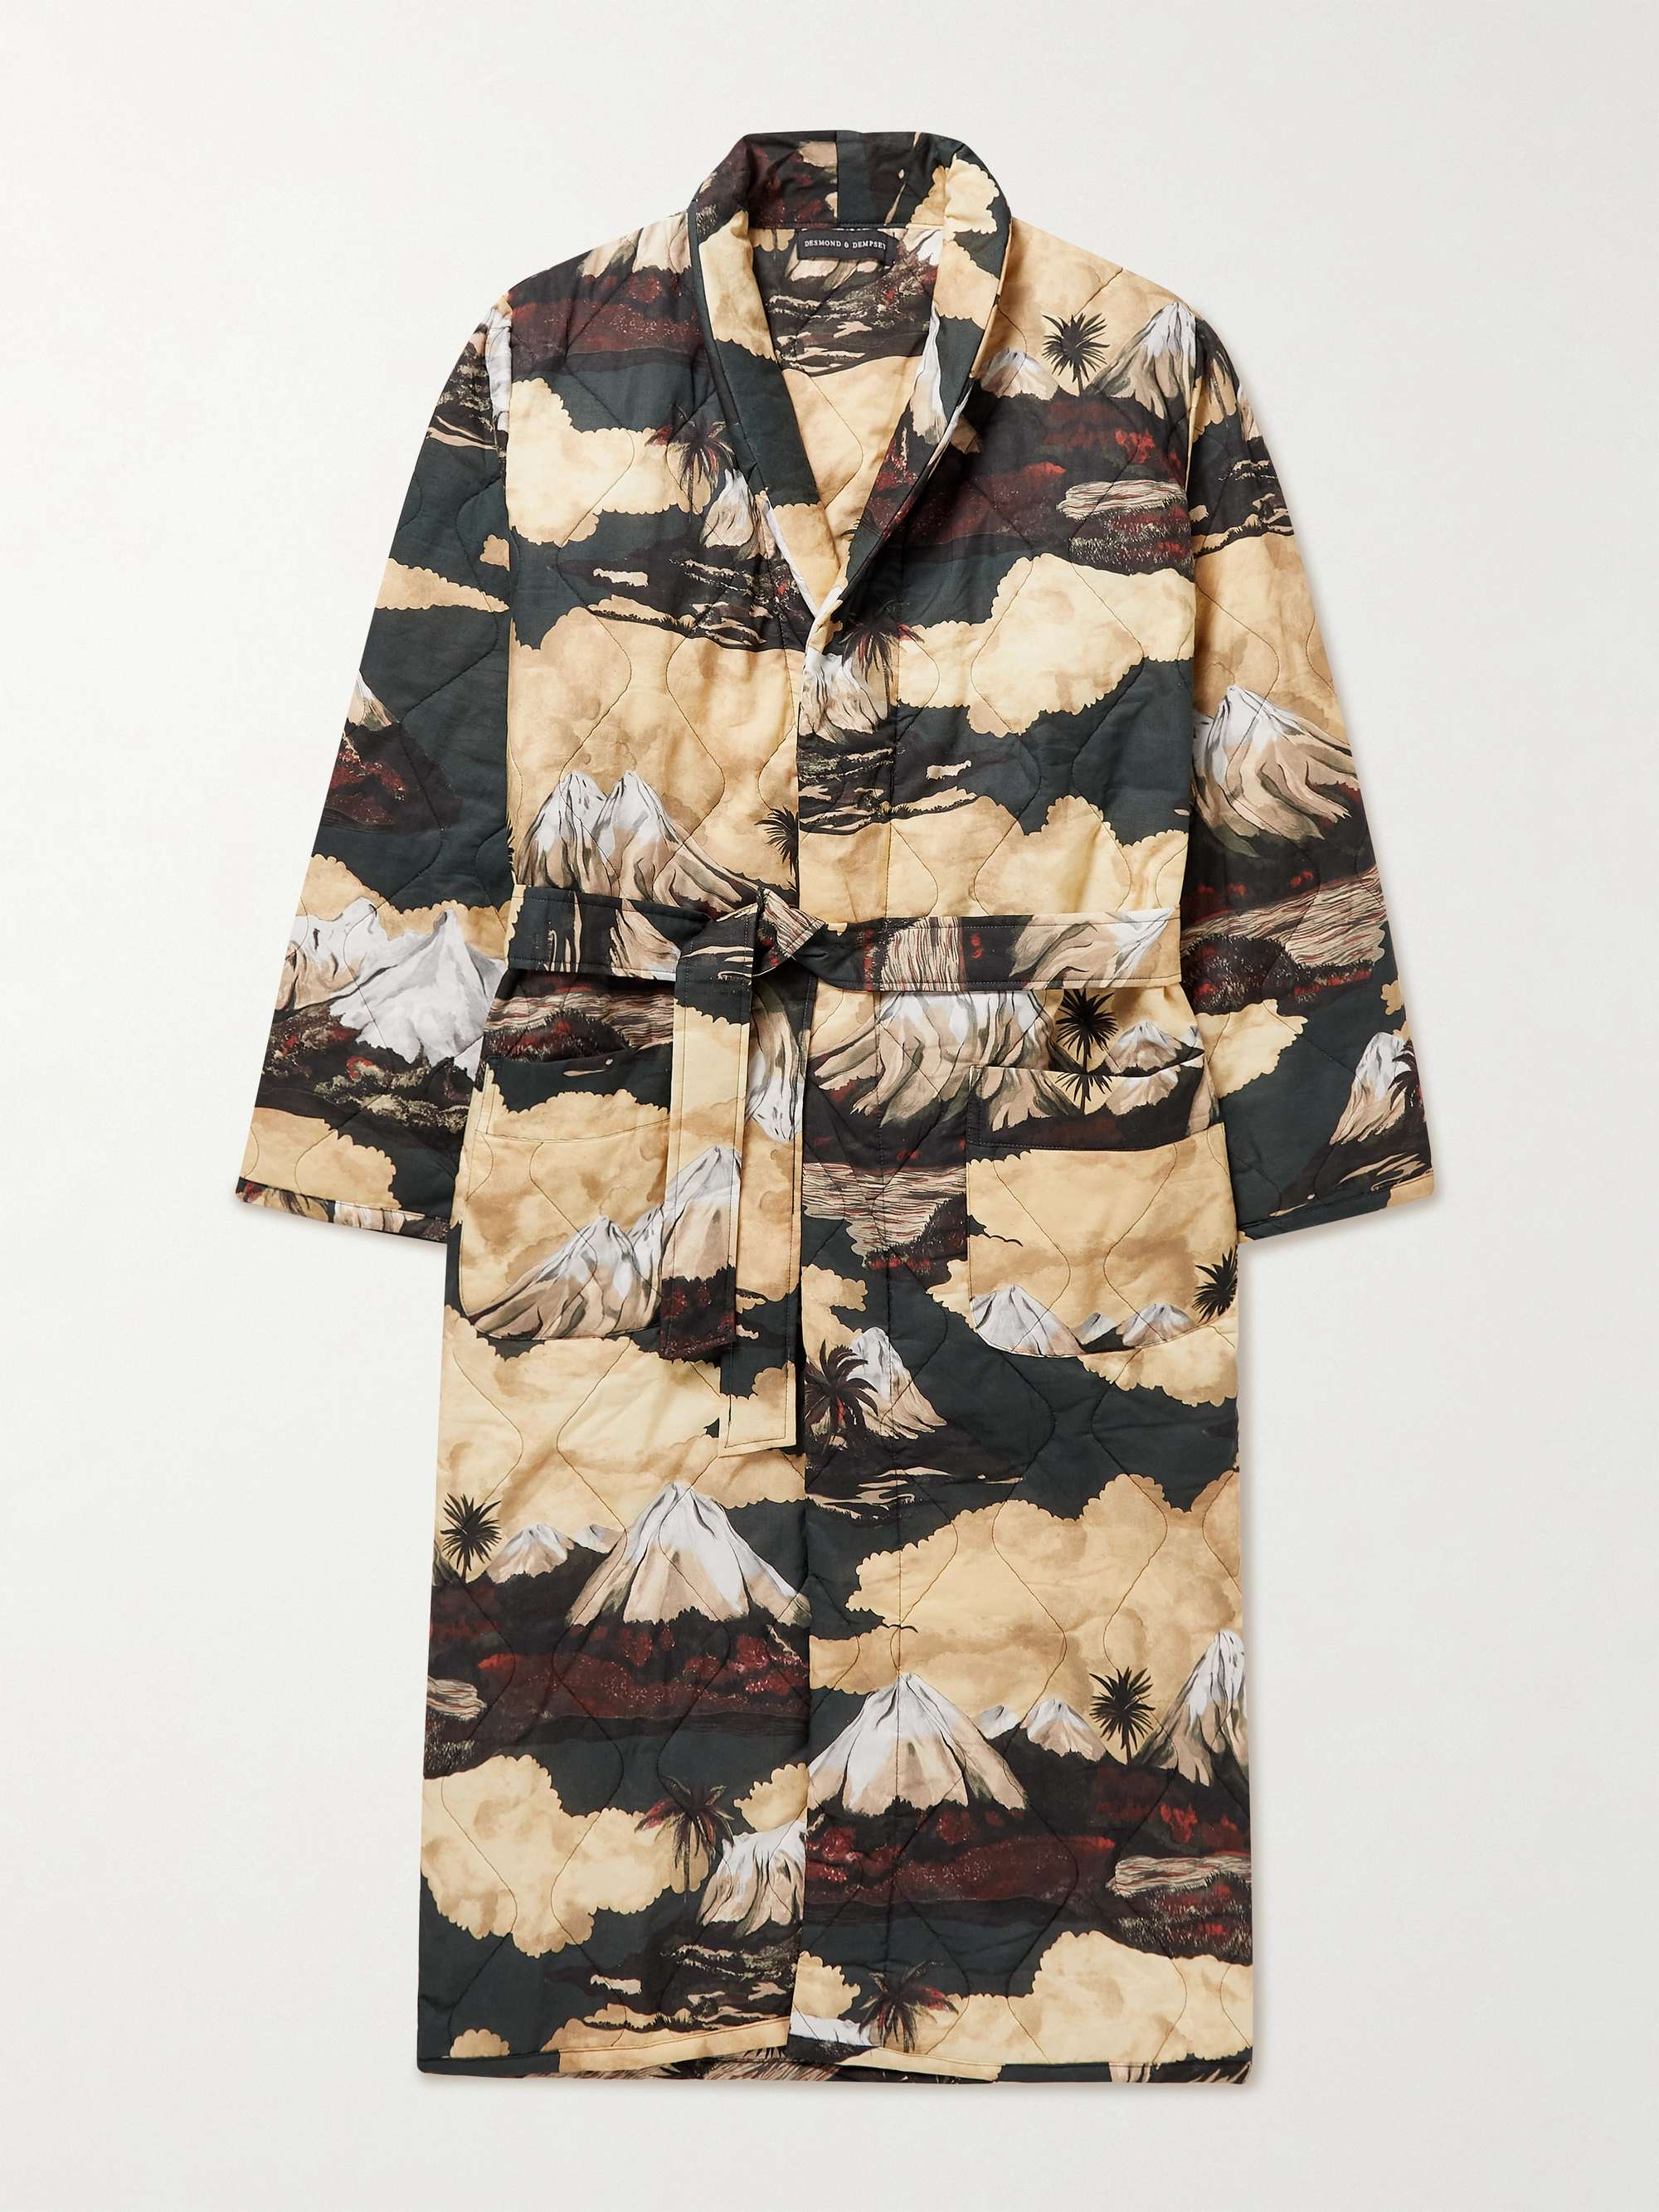 DESMOND & DEMPSEY Belted Quilted Printed Cotton Robe